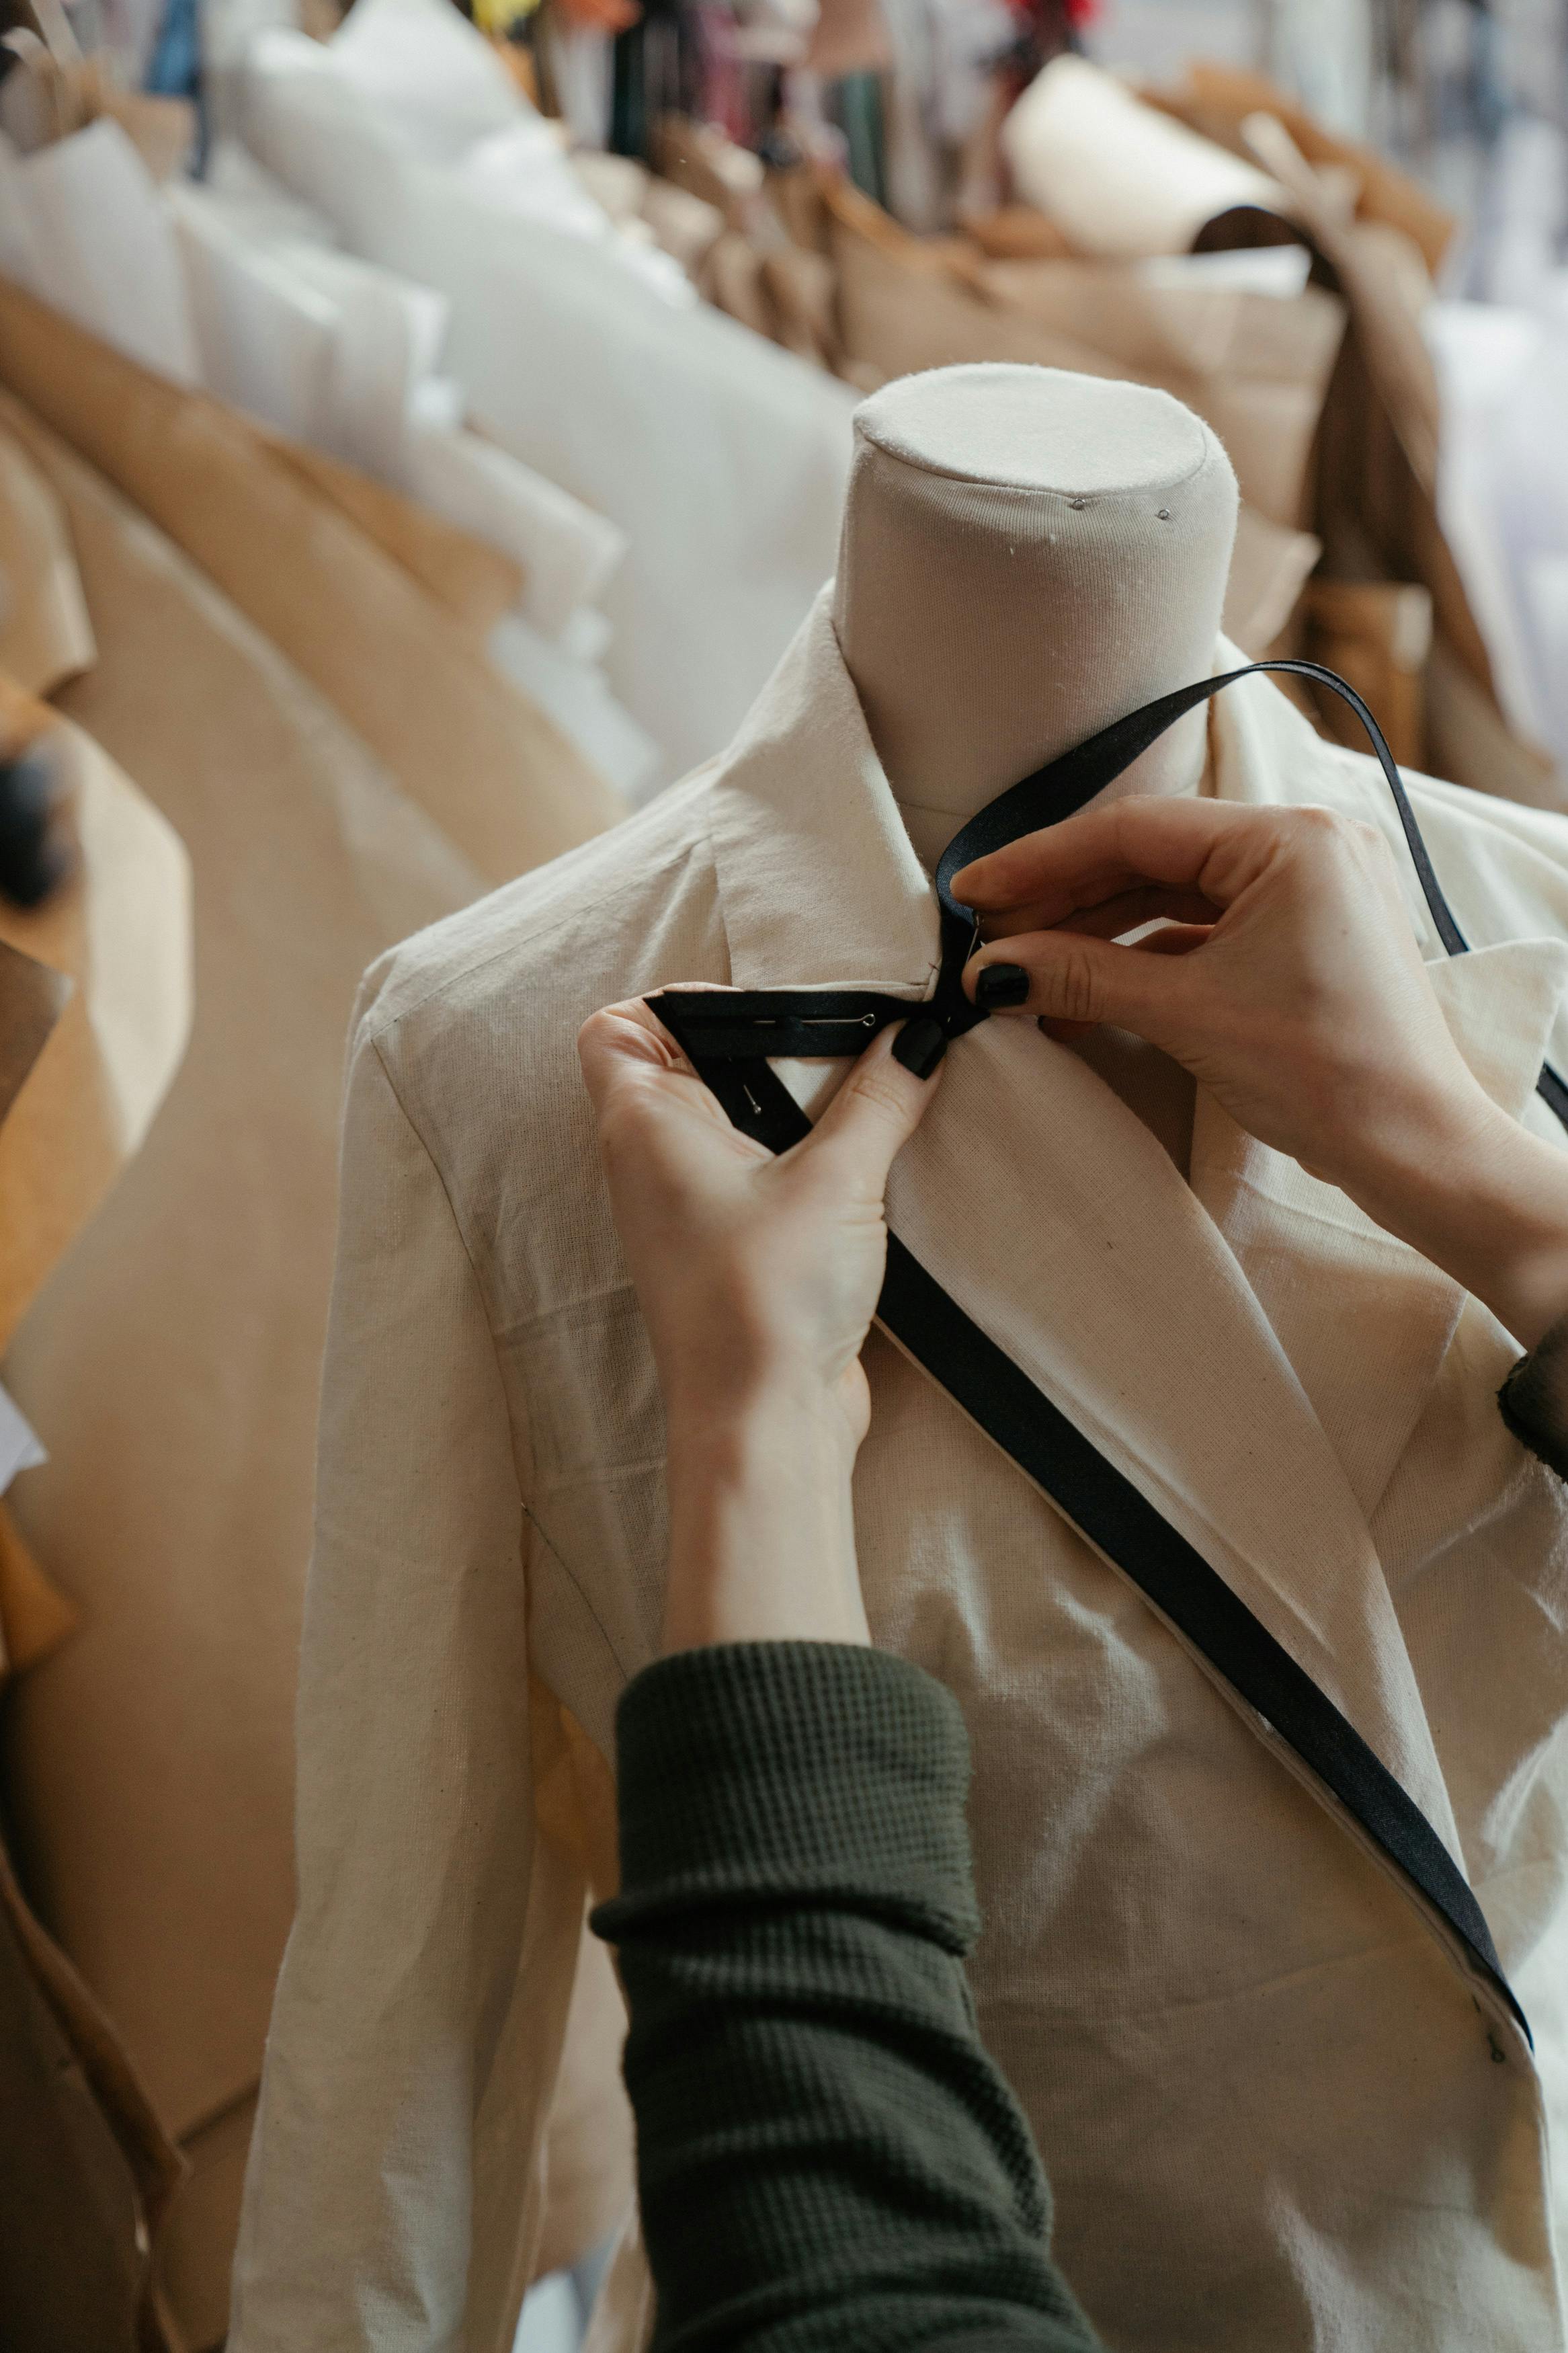 Hands working on a shirt | Source: Pexels